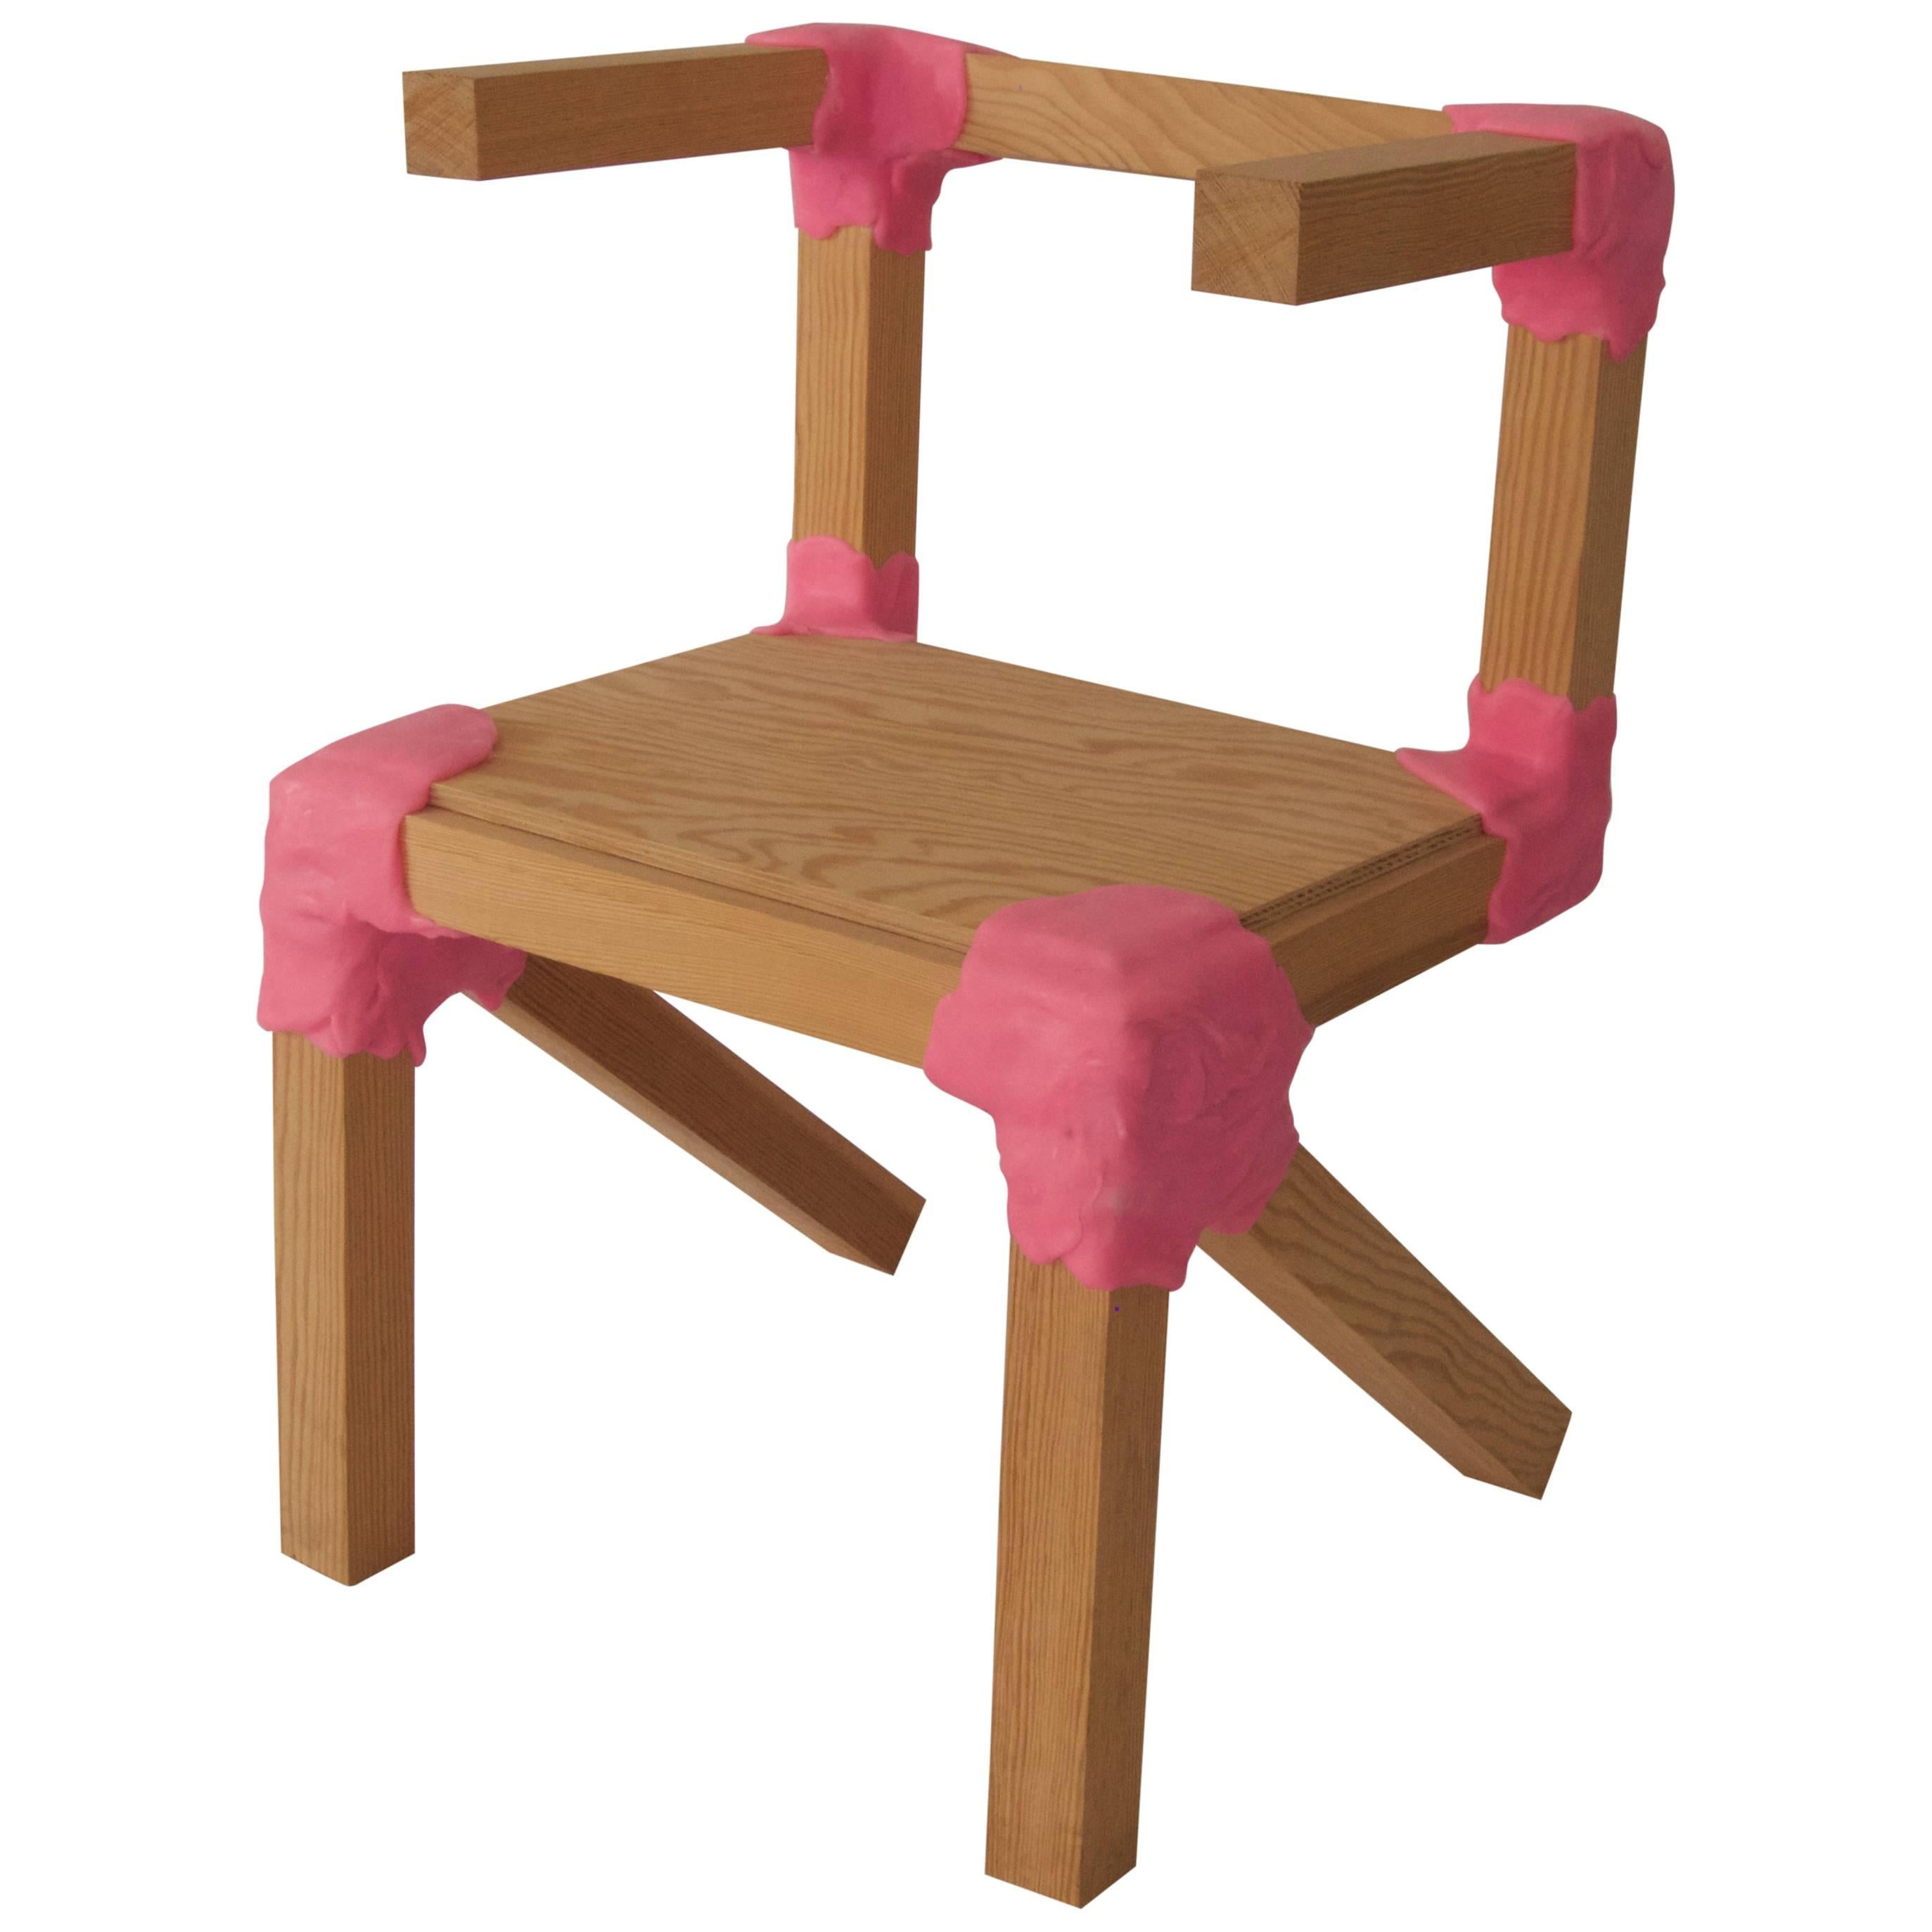 Rare "Amateur Workshop" Chair (kids version) by Jersey Seymour For Sale